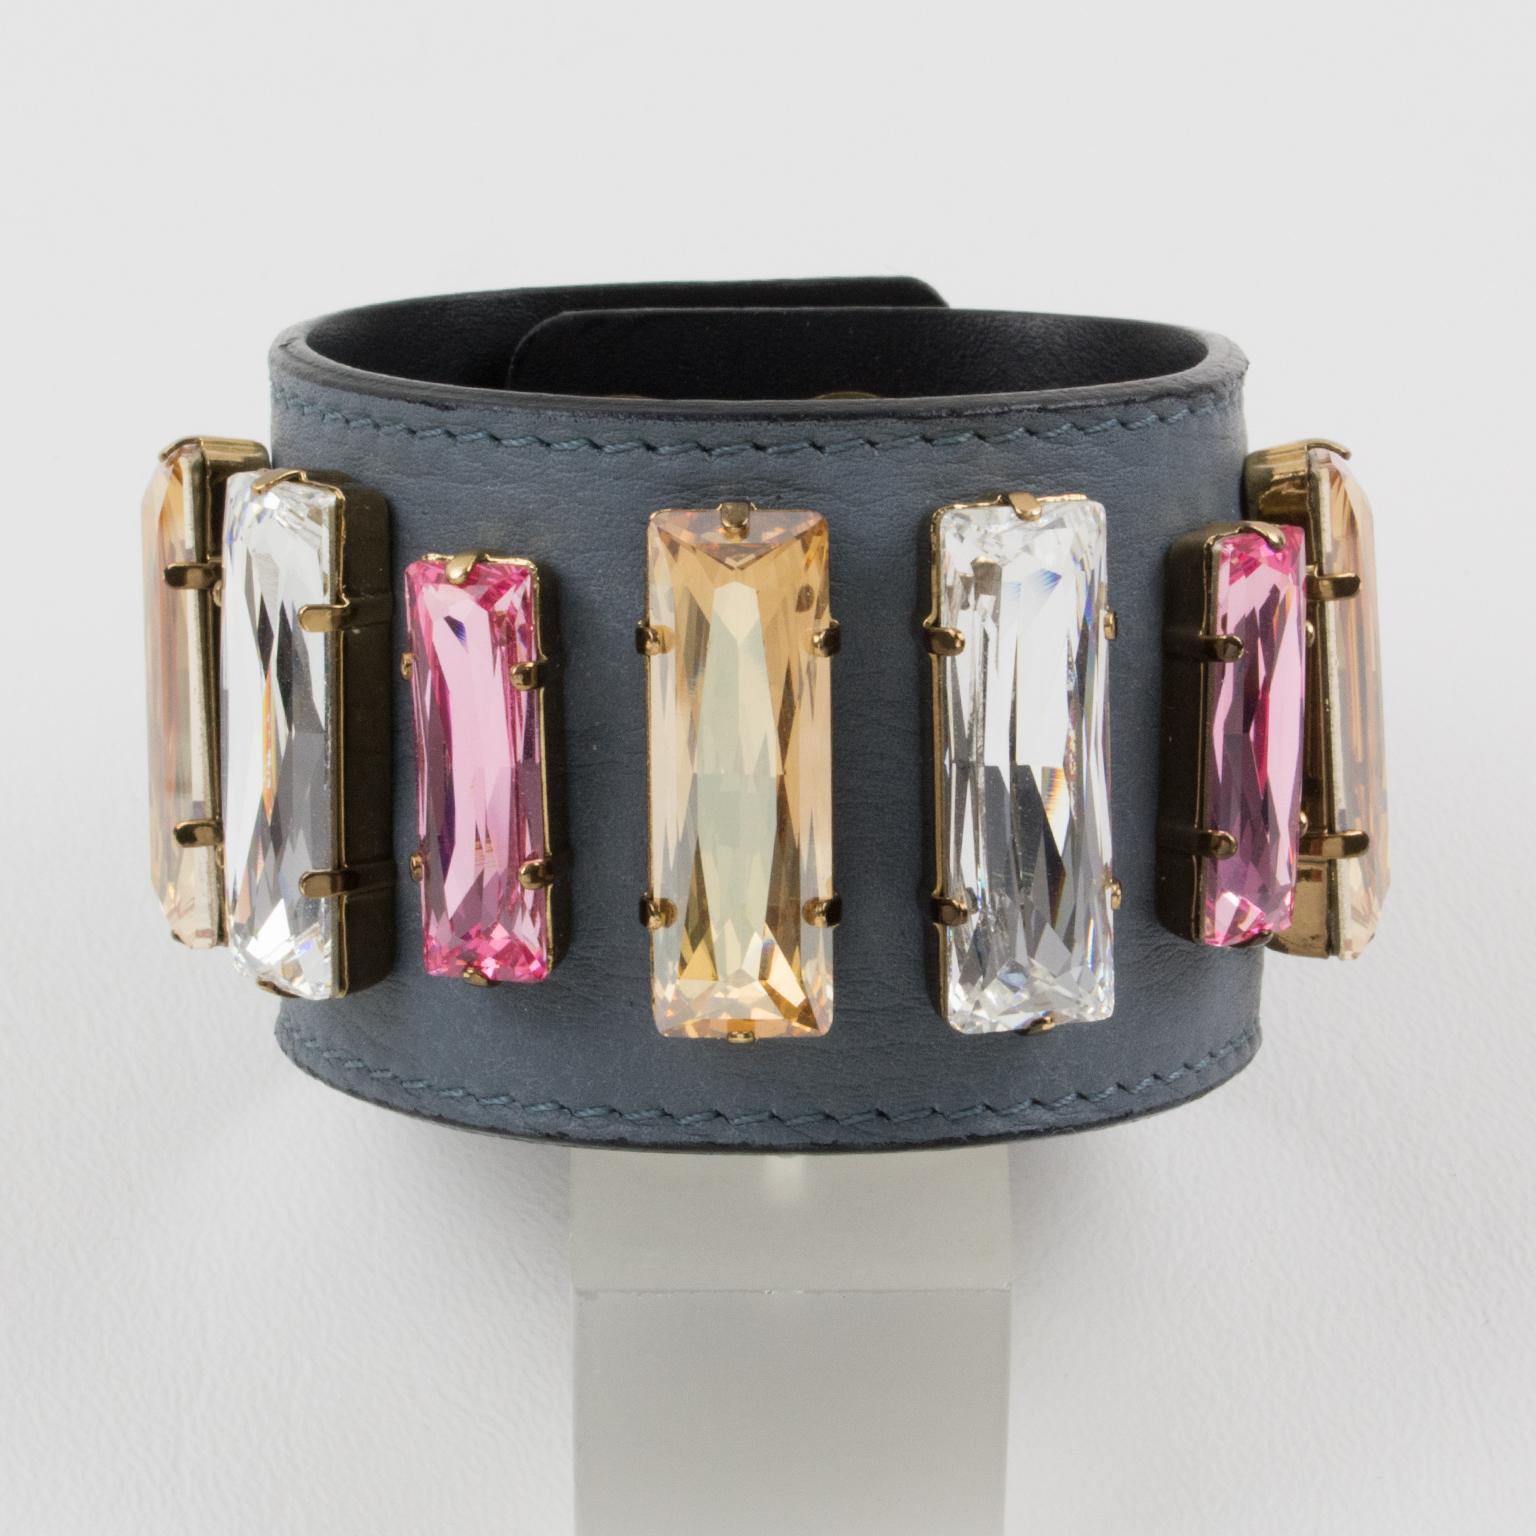 Sonia Rykiel Paris Pastel Jeweled and Gray Leather Belt Bracelet In Good Condition For Sale In Atlanta, GA